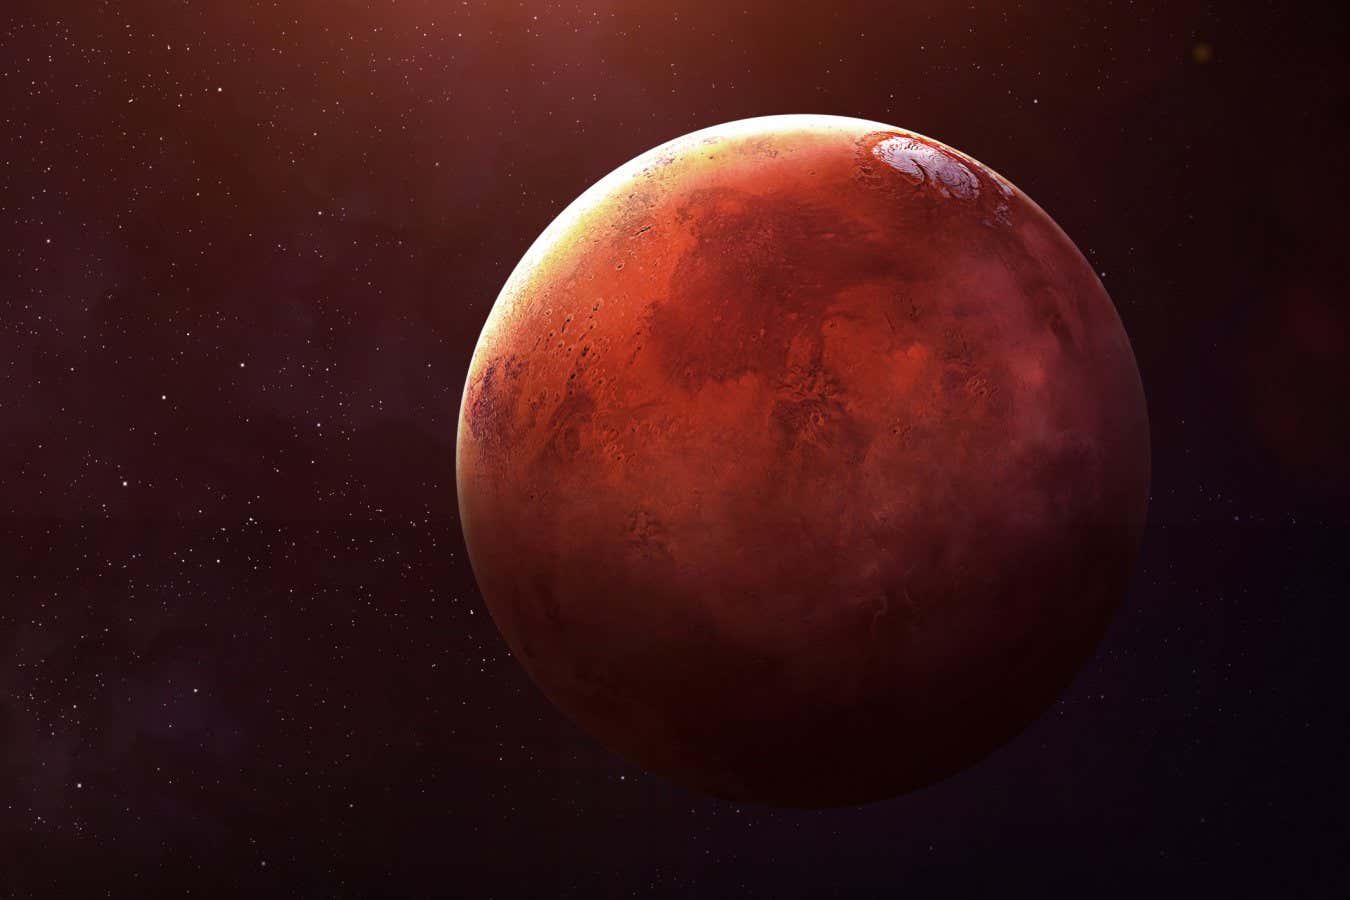 Mars is blasting plasma out of its atmosphere into space